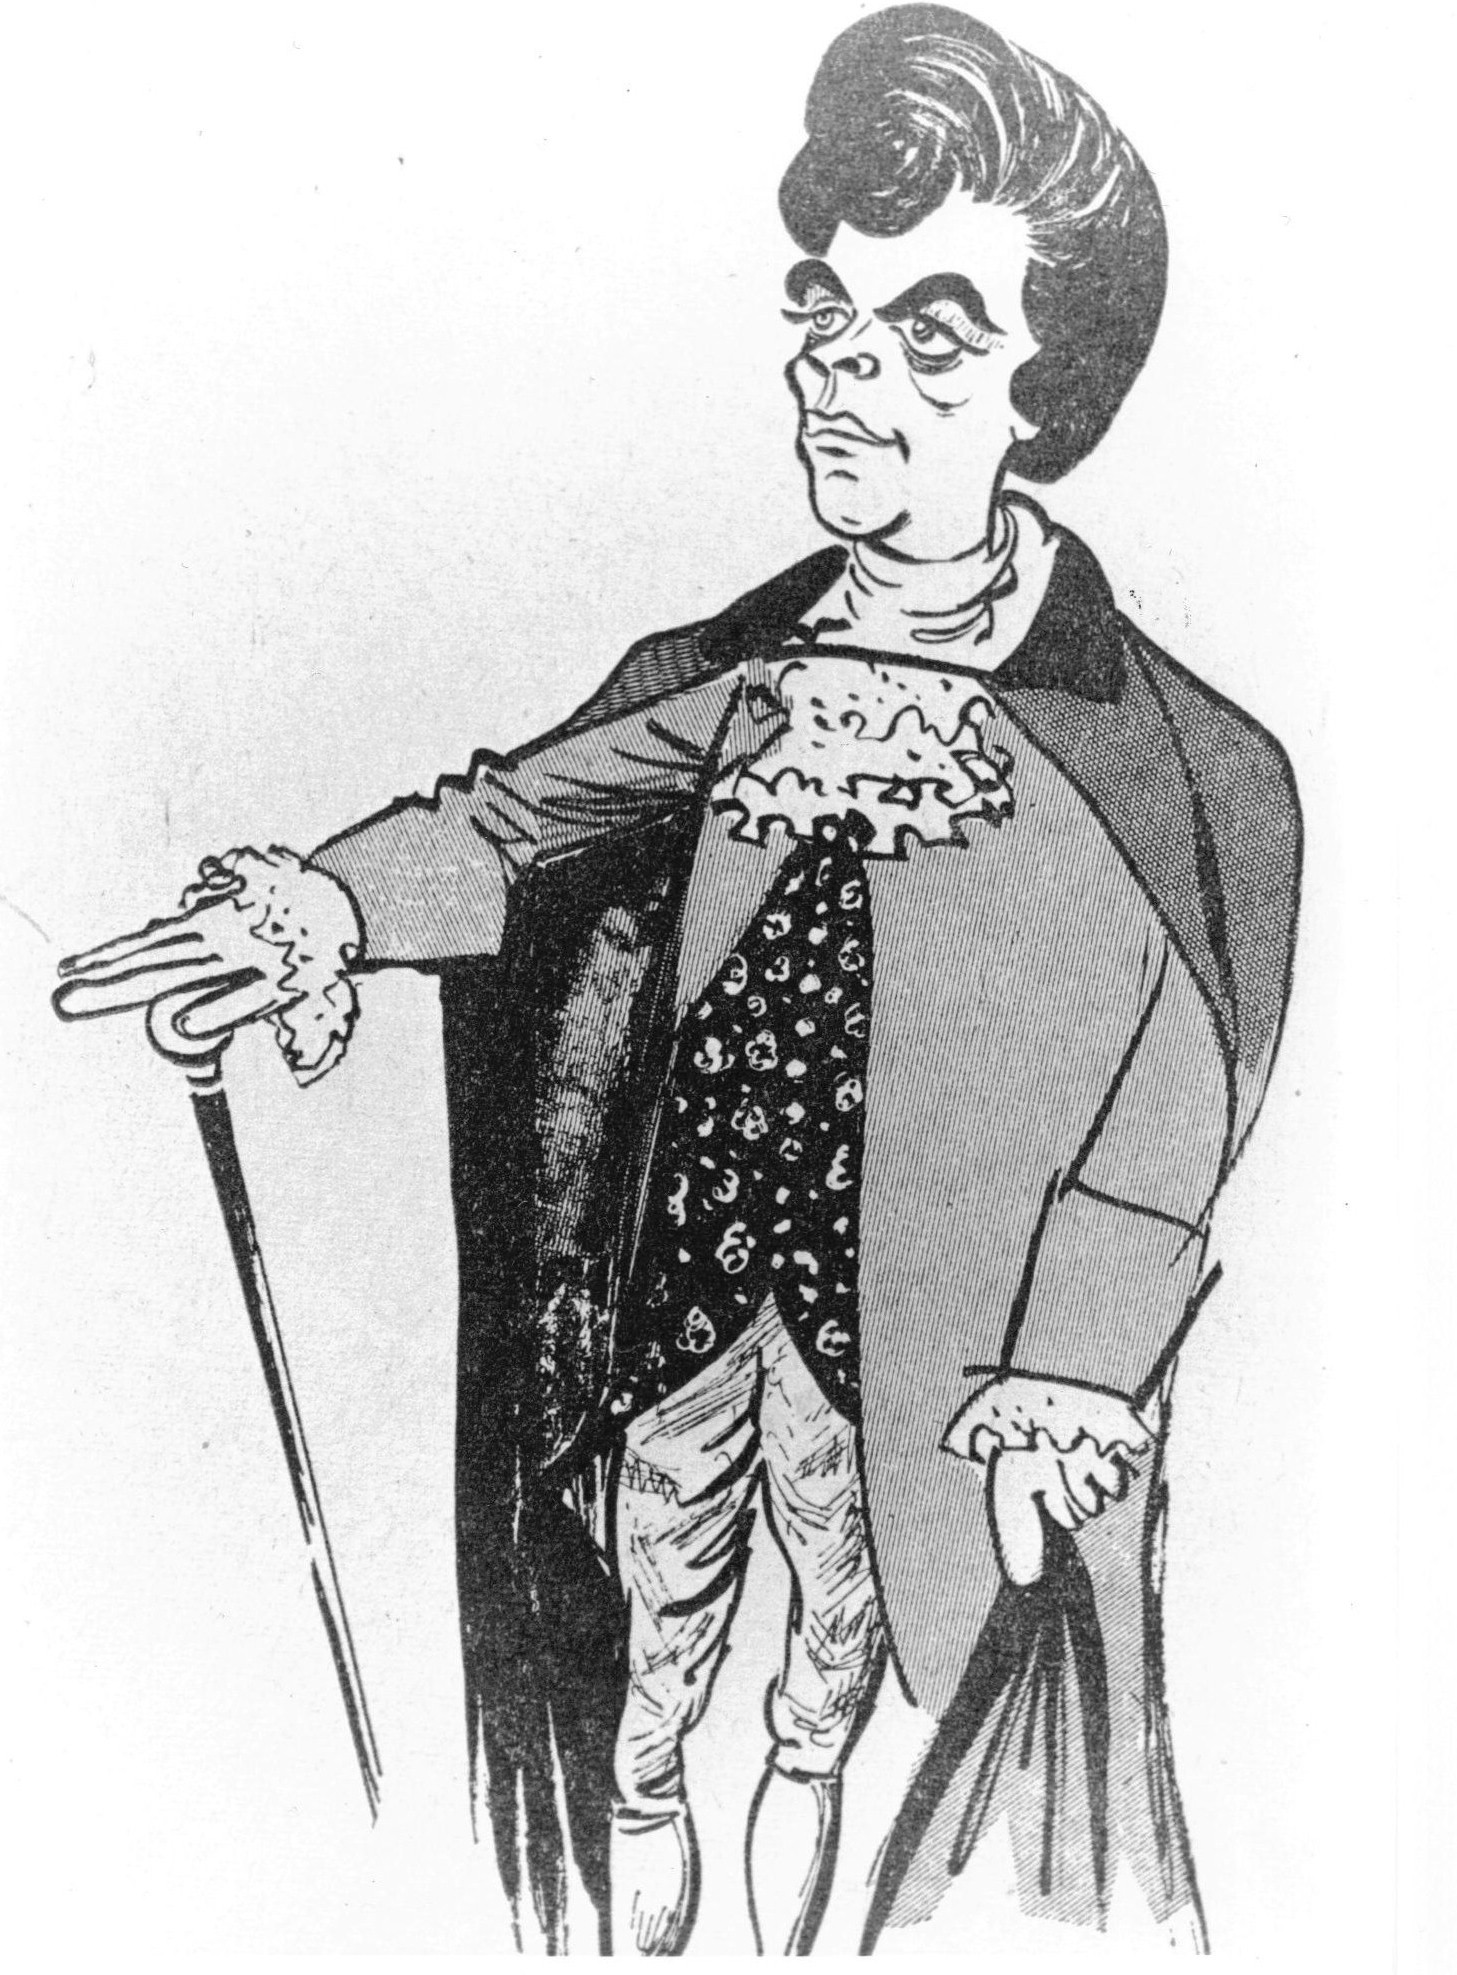 01_John Cairney as James Boswell in 'Young Auchinleck' - caricature by Emilio Coia 1962.jpg